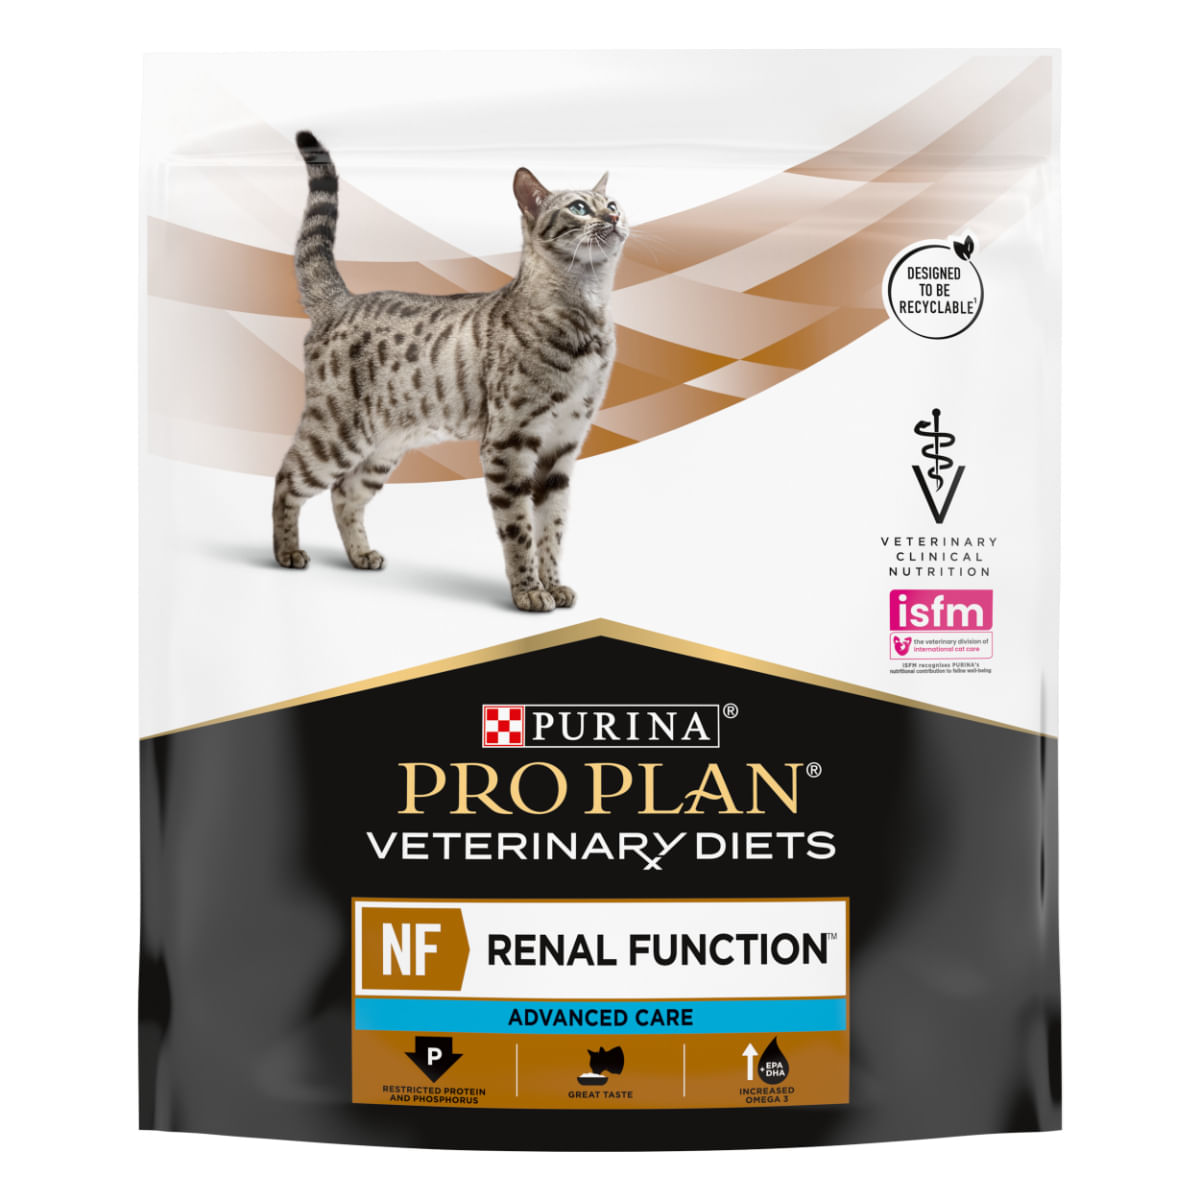 Purina Pro Plan Veterinary Diets Nf Renal Function Advanced Care Gatto 350G